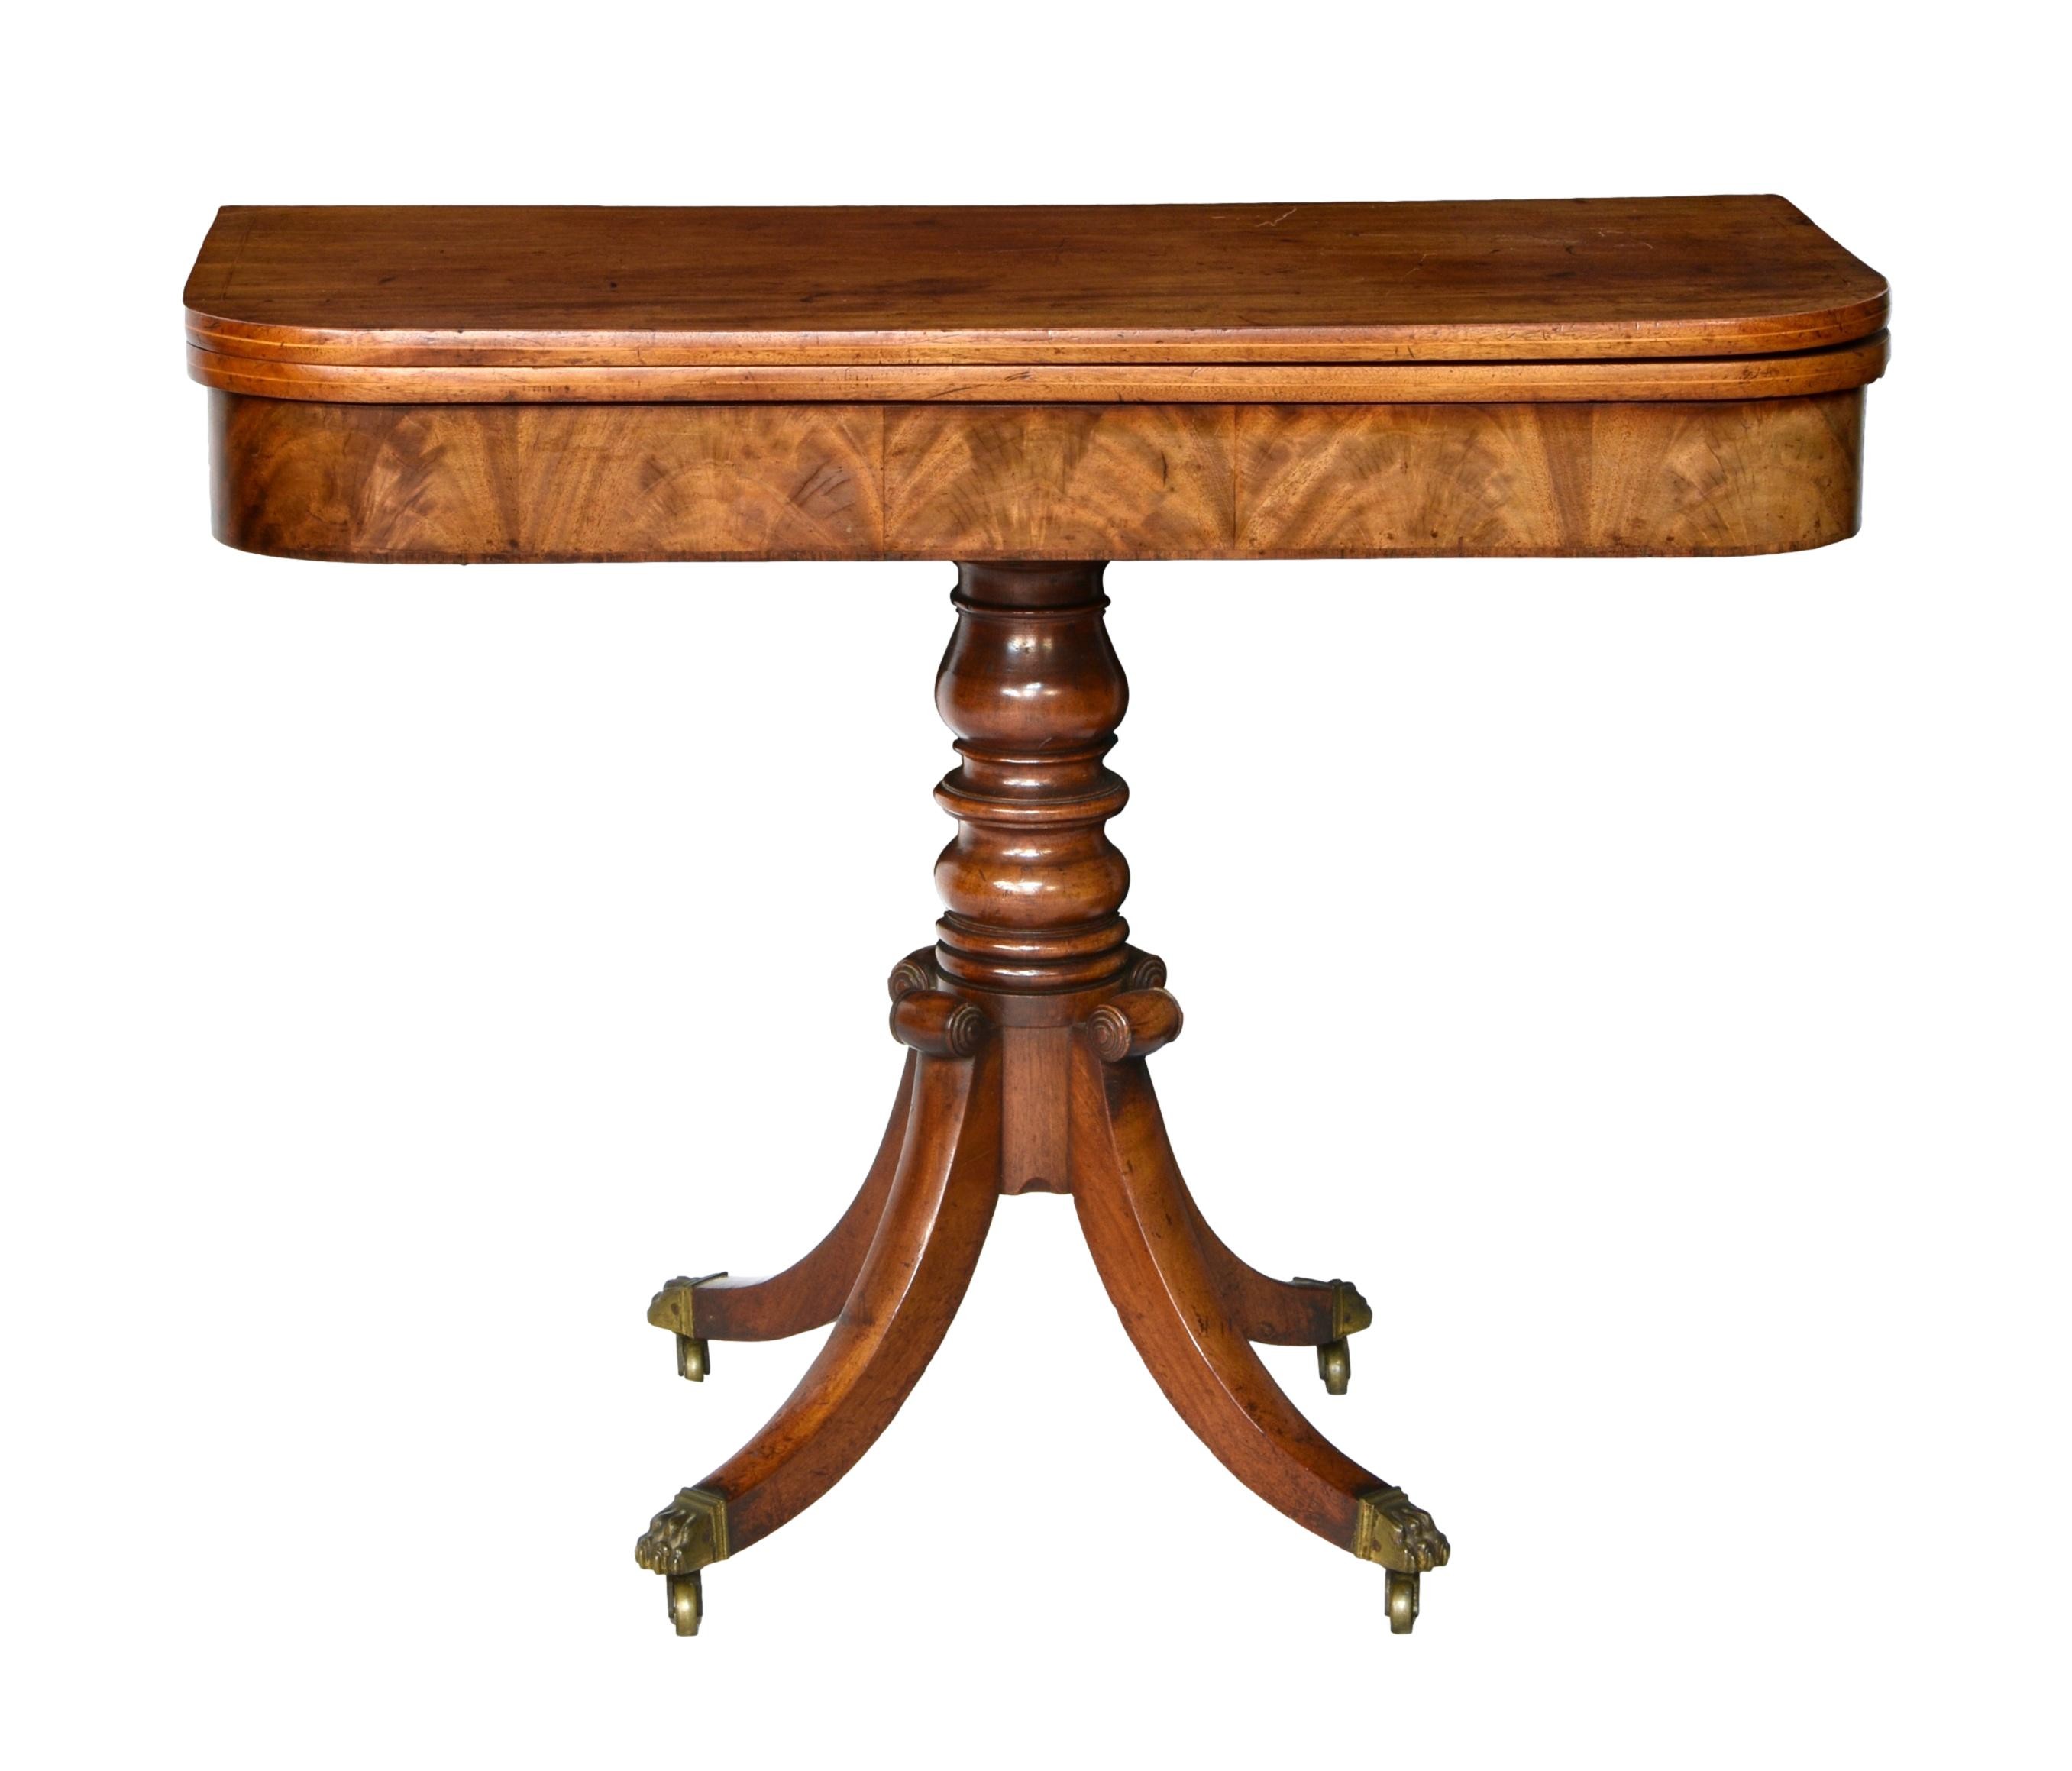 A late-Regency D-shaped mahogany tea table, the boxwood strung top over a rosewood edge banded